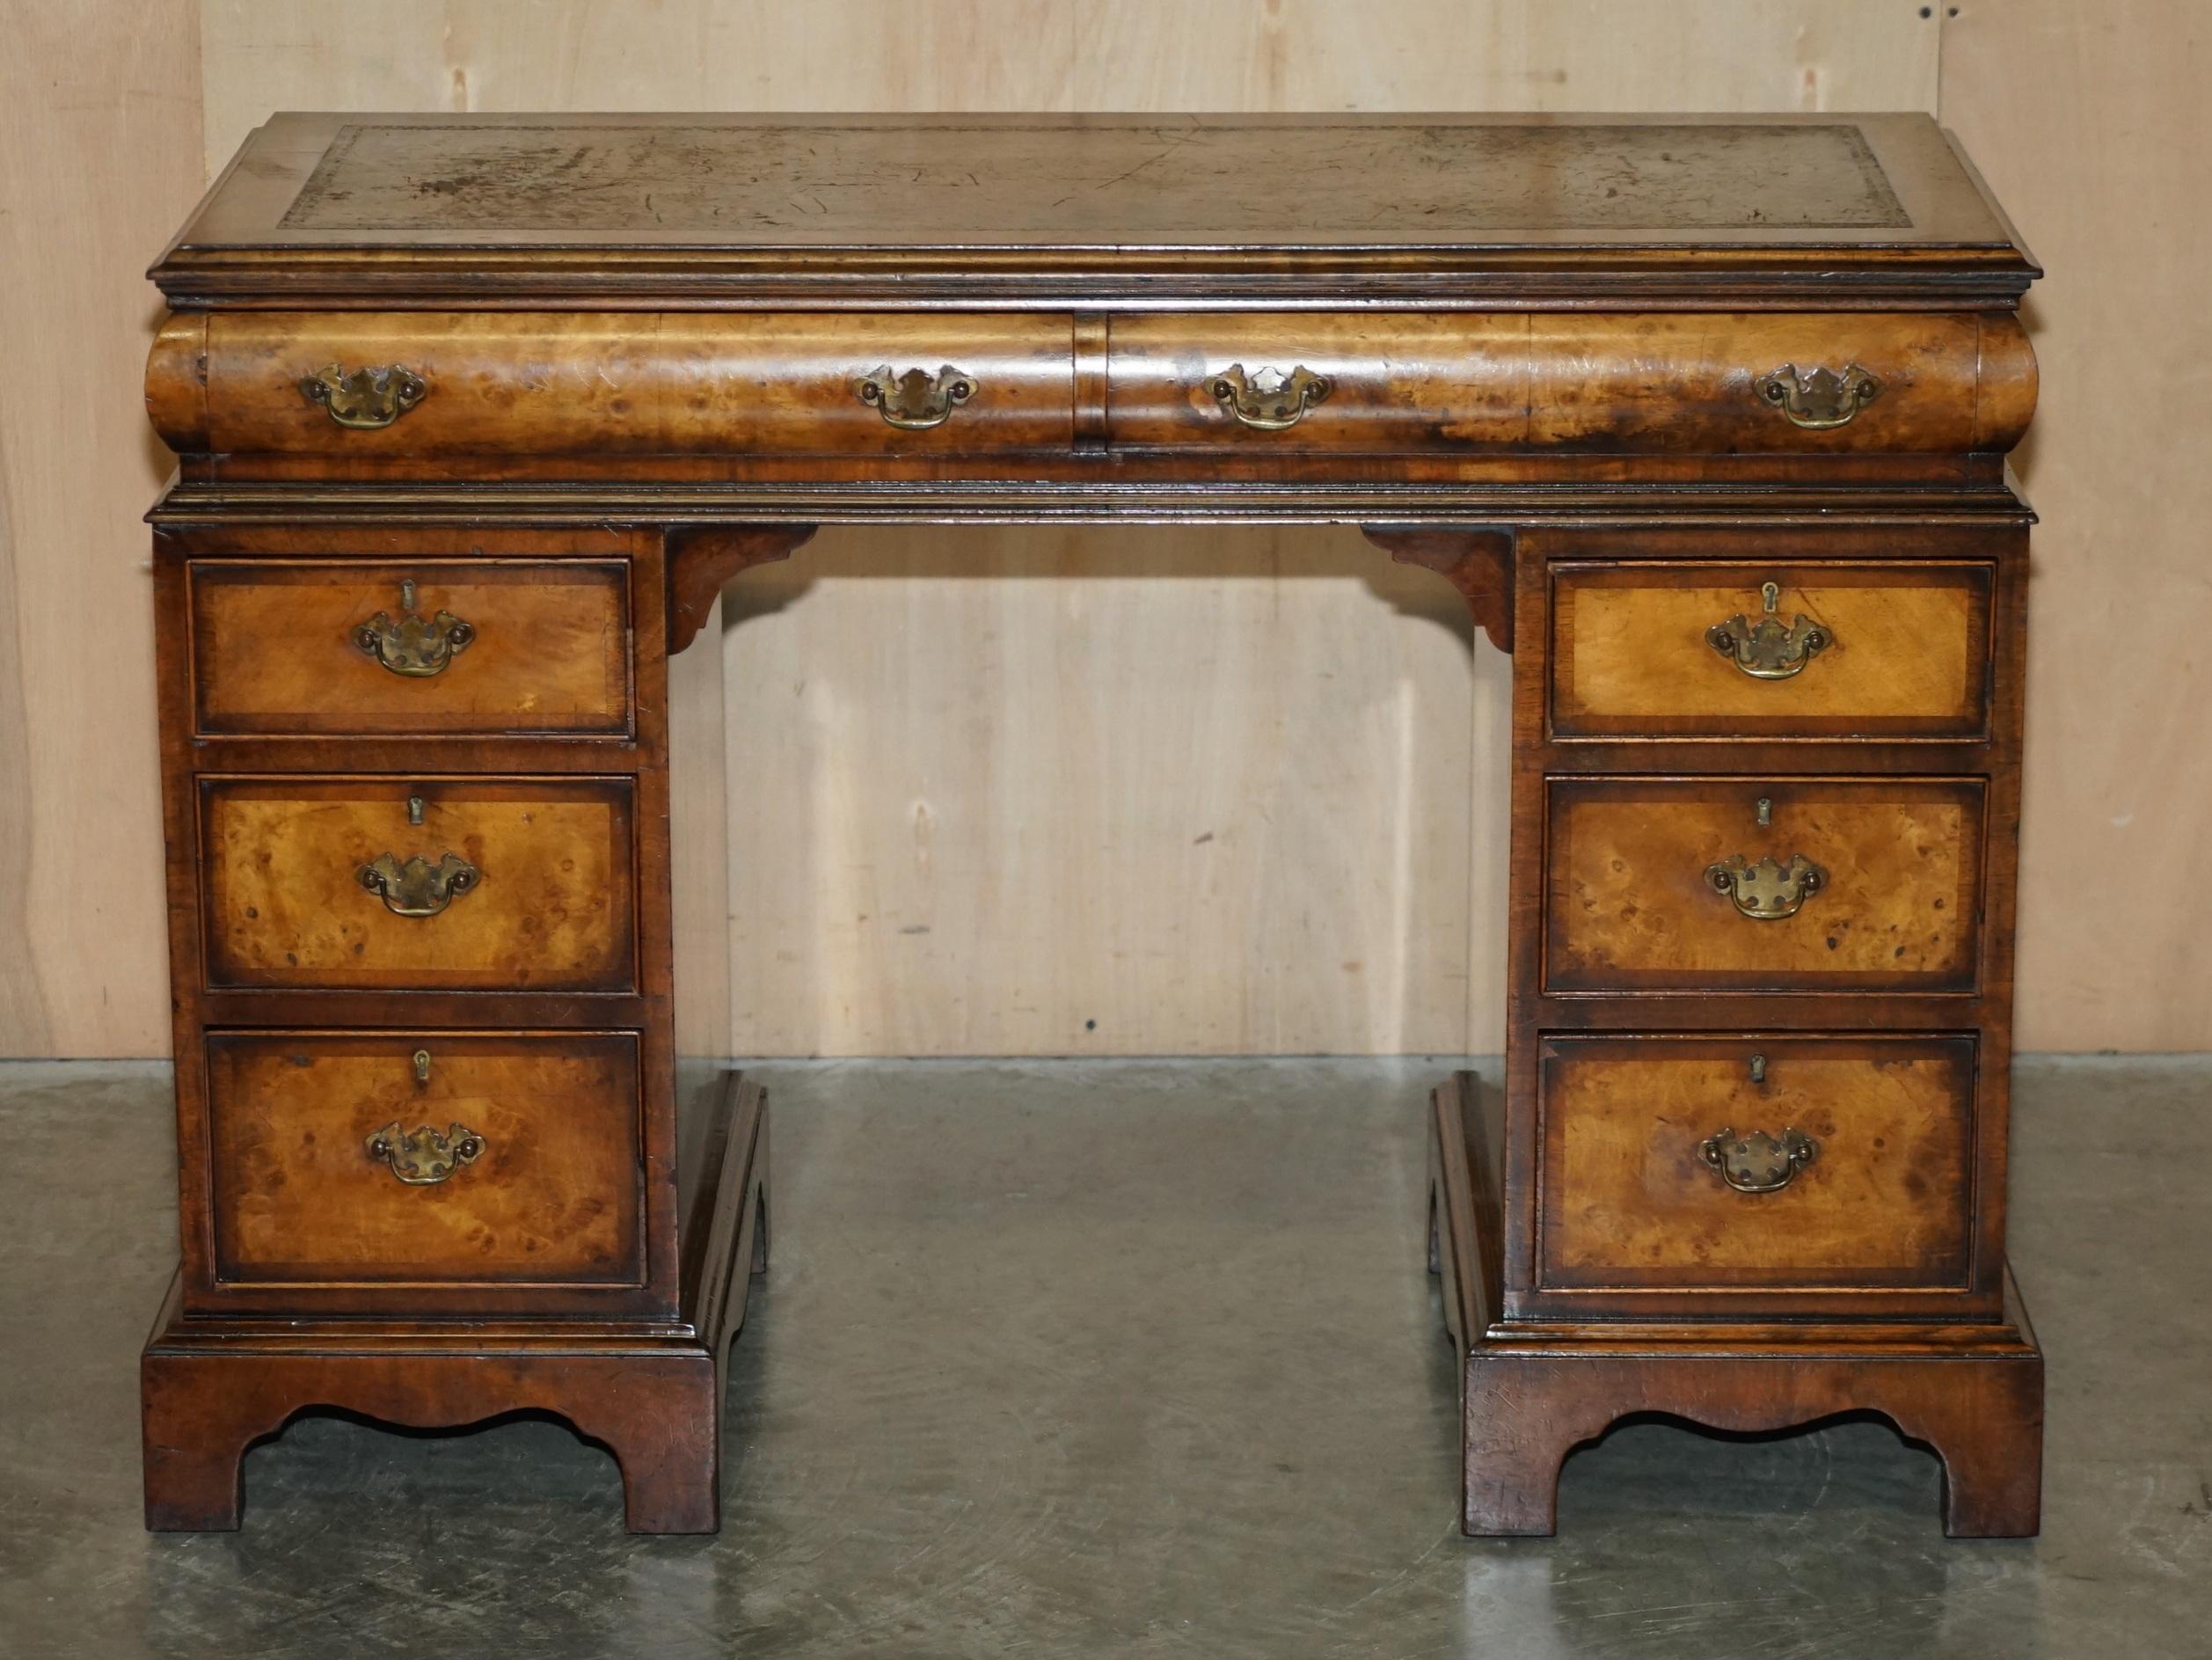 We are delighted to offer for sale this very fine fully, Antique circa 1900, Burr Walnut twin pedestal partner desk with hand dyed brown leather top.

It’s been lightly restored to include a deep clean, hand condition wax and hand polish, it will